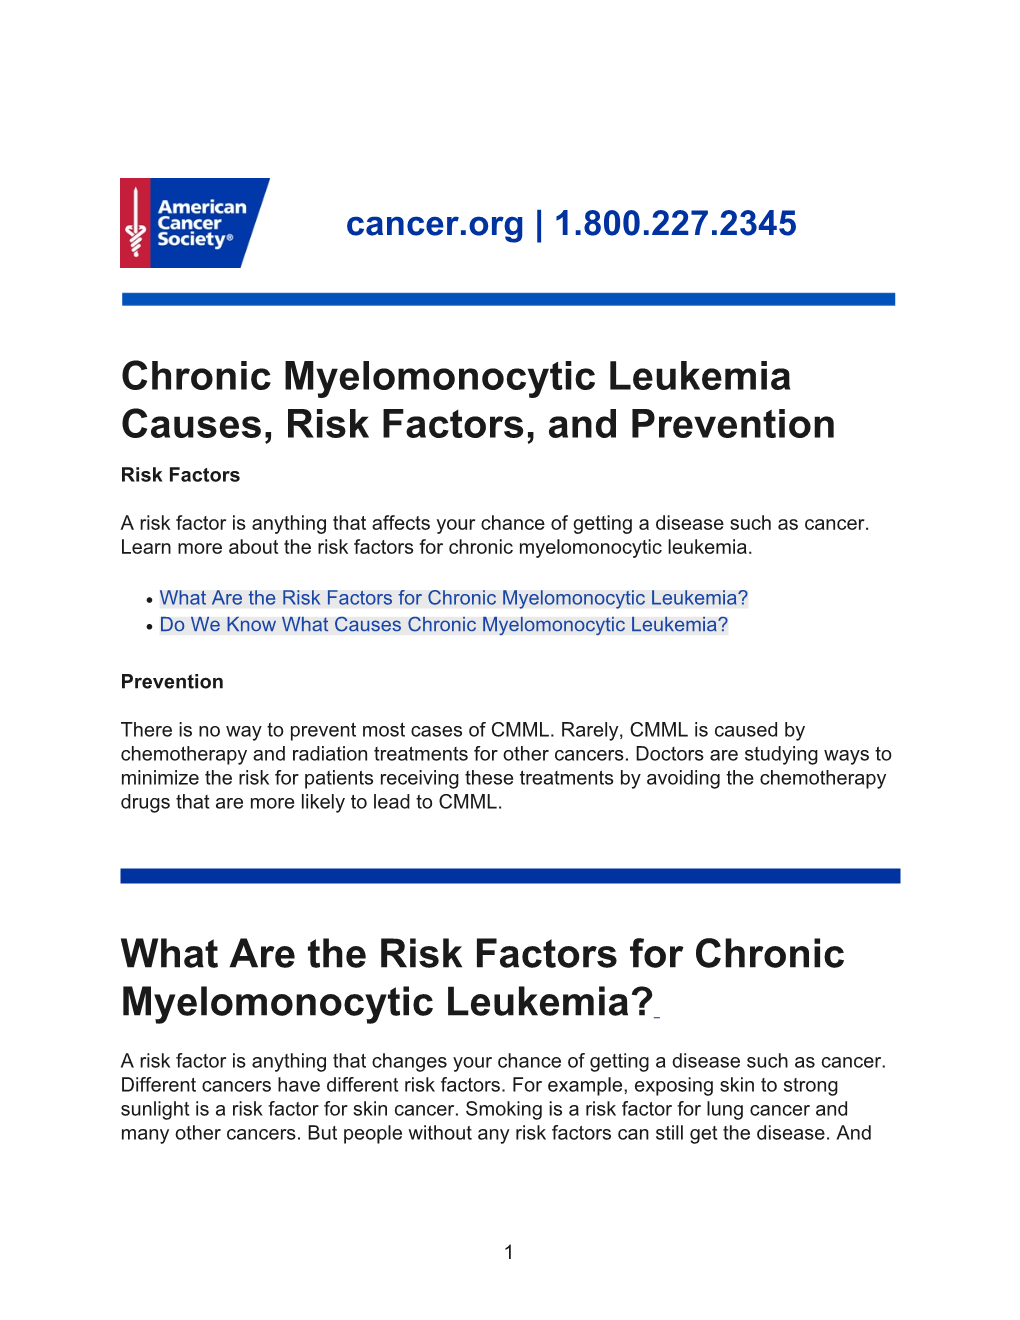 What Are the Risk Factors for Chronic Myelomonocytic Leukemia? ● Do We Know What Causes Chronic Myelomonocytic Leukemia?